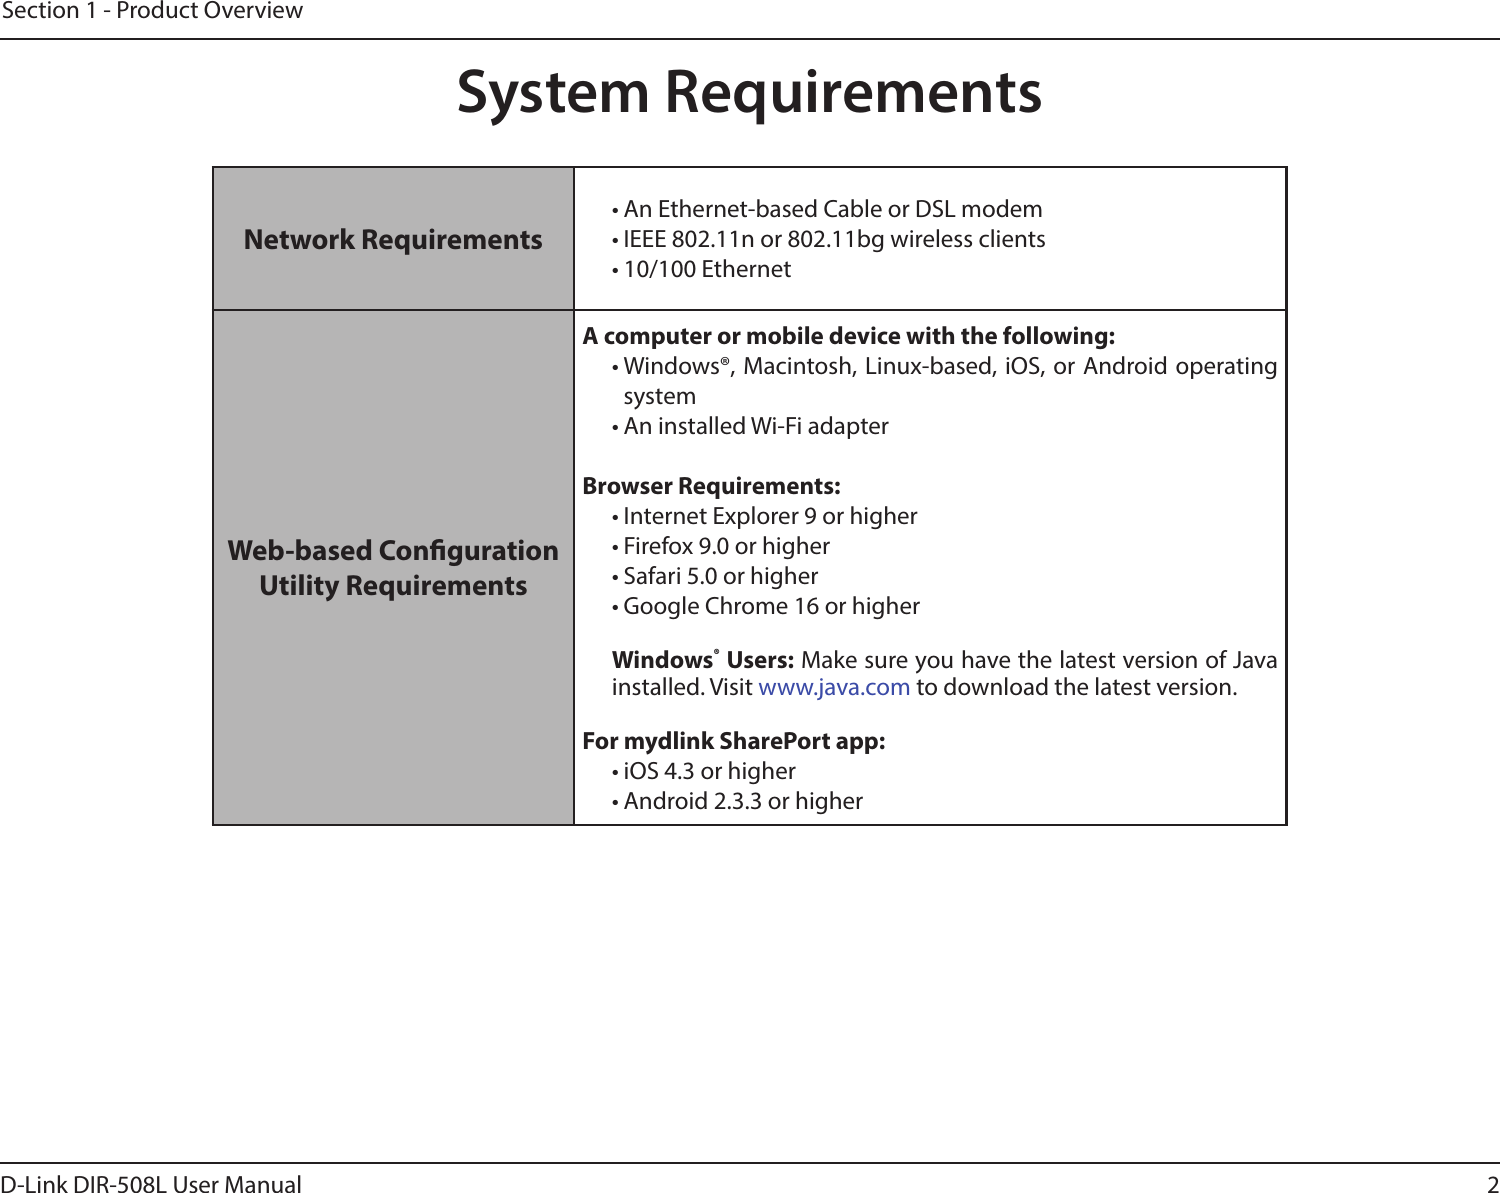 2D-Link DIR-508L User ManualSection 1 - Product OverviewNetwork Requirements• An Ethernet-based Cable or DSL modem• IEEE 802.11n or 802.11bg wireless clients• 10/100 EthernetWeb-based Conguration Utility RequirementsA computer or mobile device with the following:• Windows®, Macintosh, Linux-based, iOS, or Android operating system• An installed Wi-Fi adapterBrowser Requirements:• Internet Explorer 9 or higher• Firefox 9.0 or higher• Safari 5.0 or higher• Google Chrome 16 or higher Windows® Users: Make sure you have the latest version of Java installed. Visit www.java.com to download the latest version.For mydlink SharePort app:• iOS 4.3 or higher• Android 2.3.3 or higherSystem Requirements